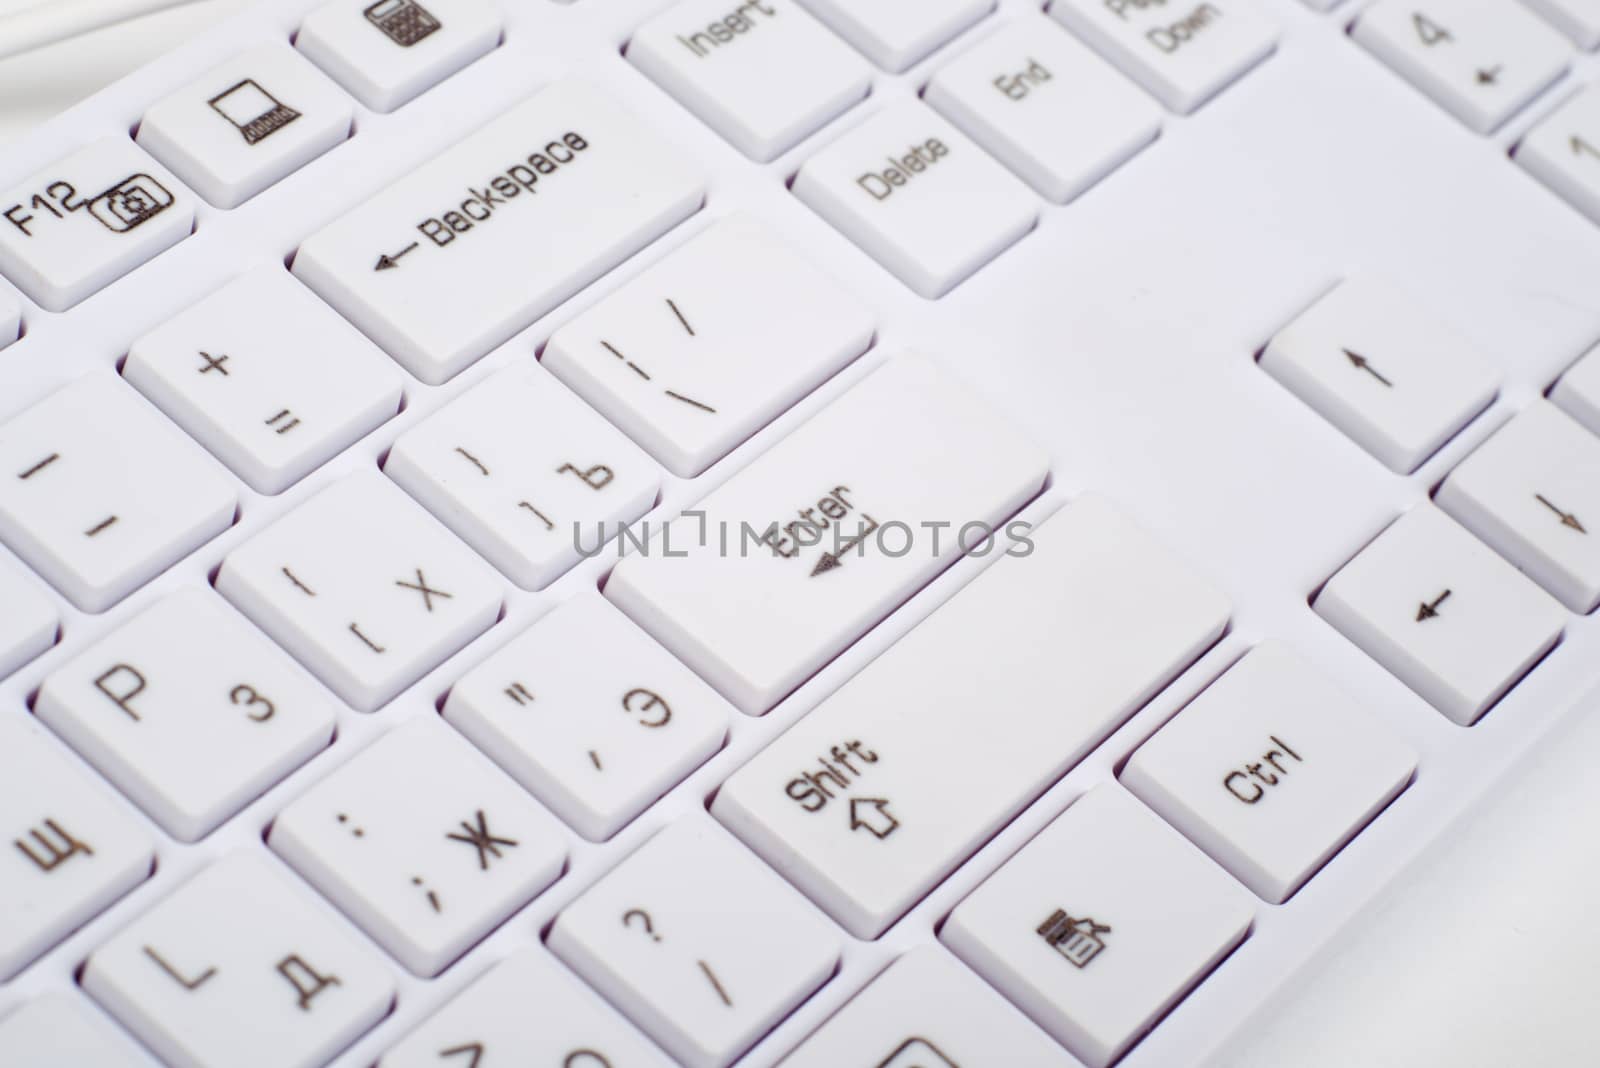 Computer keyboard on isolated white background, close up view